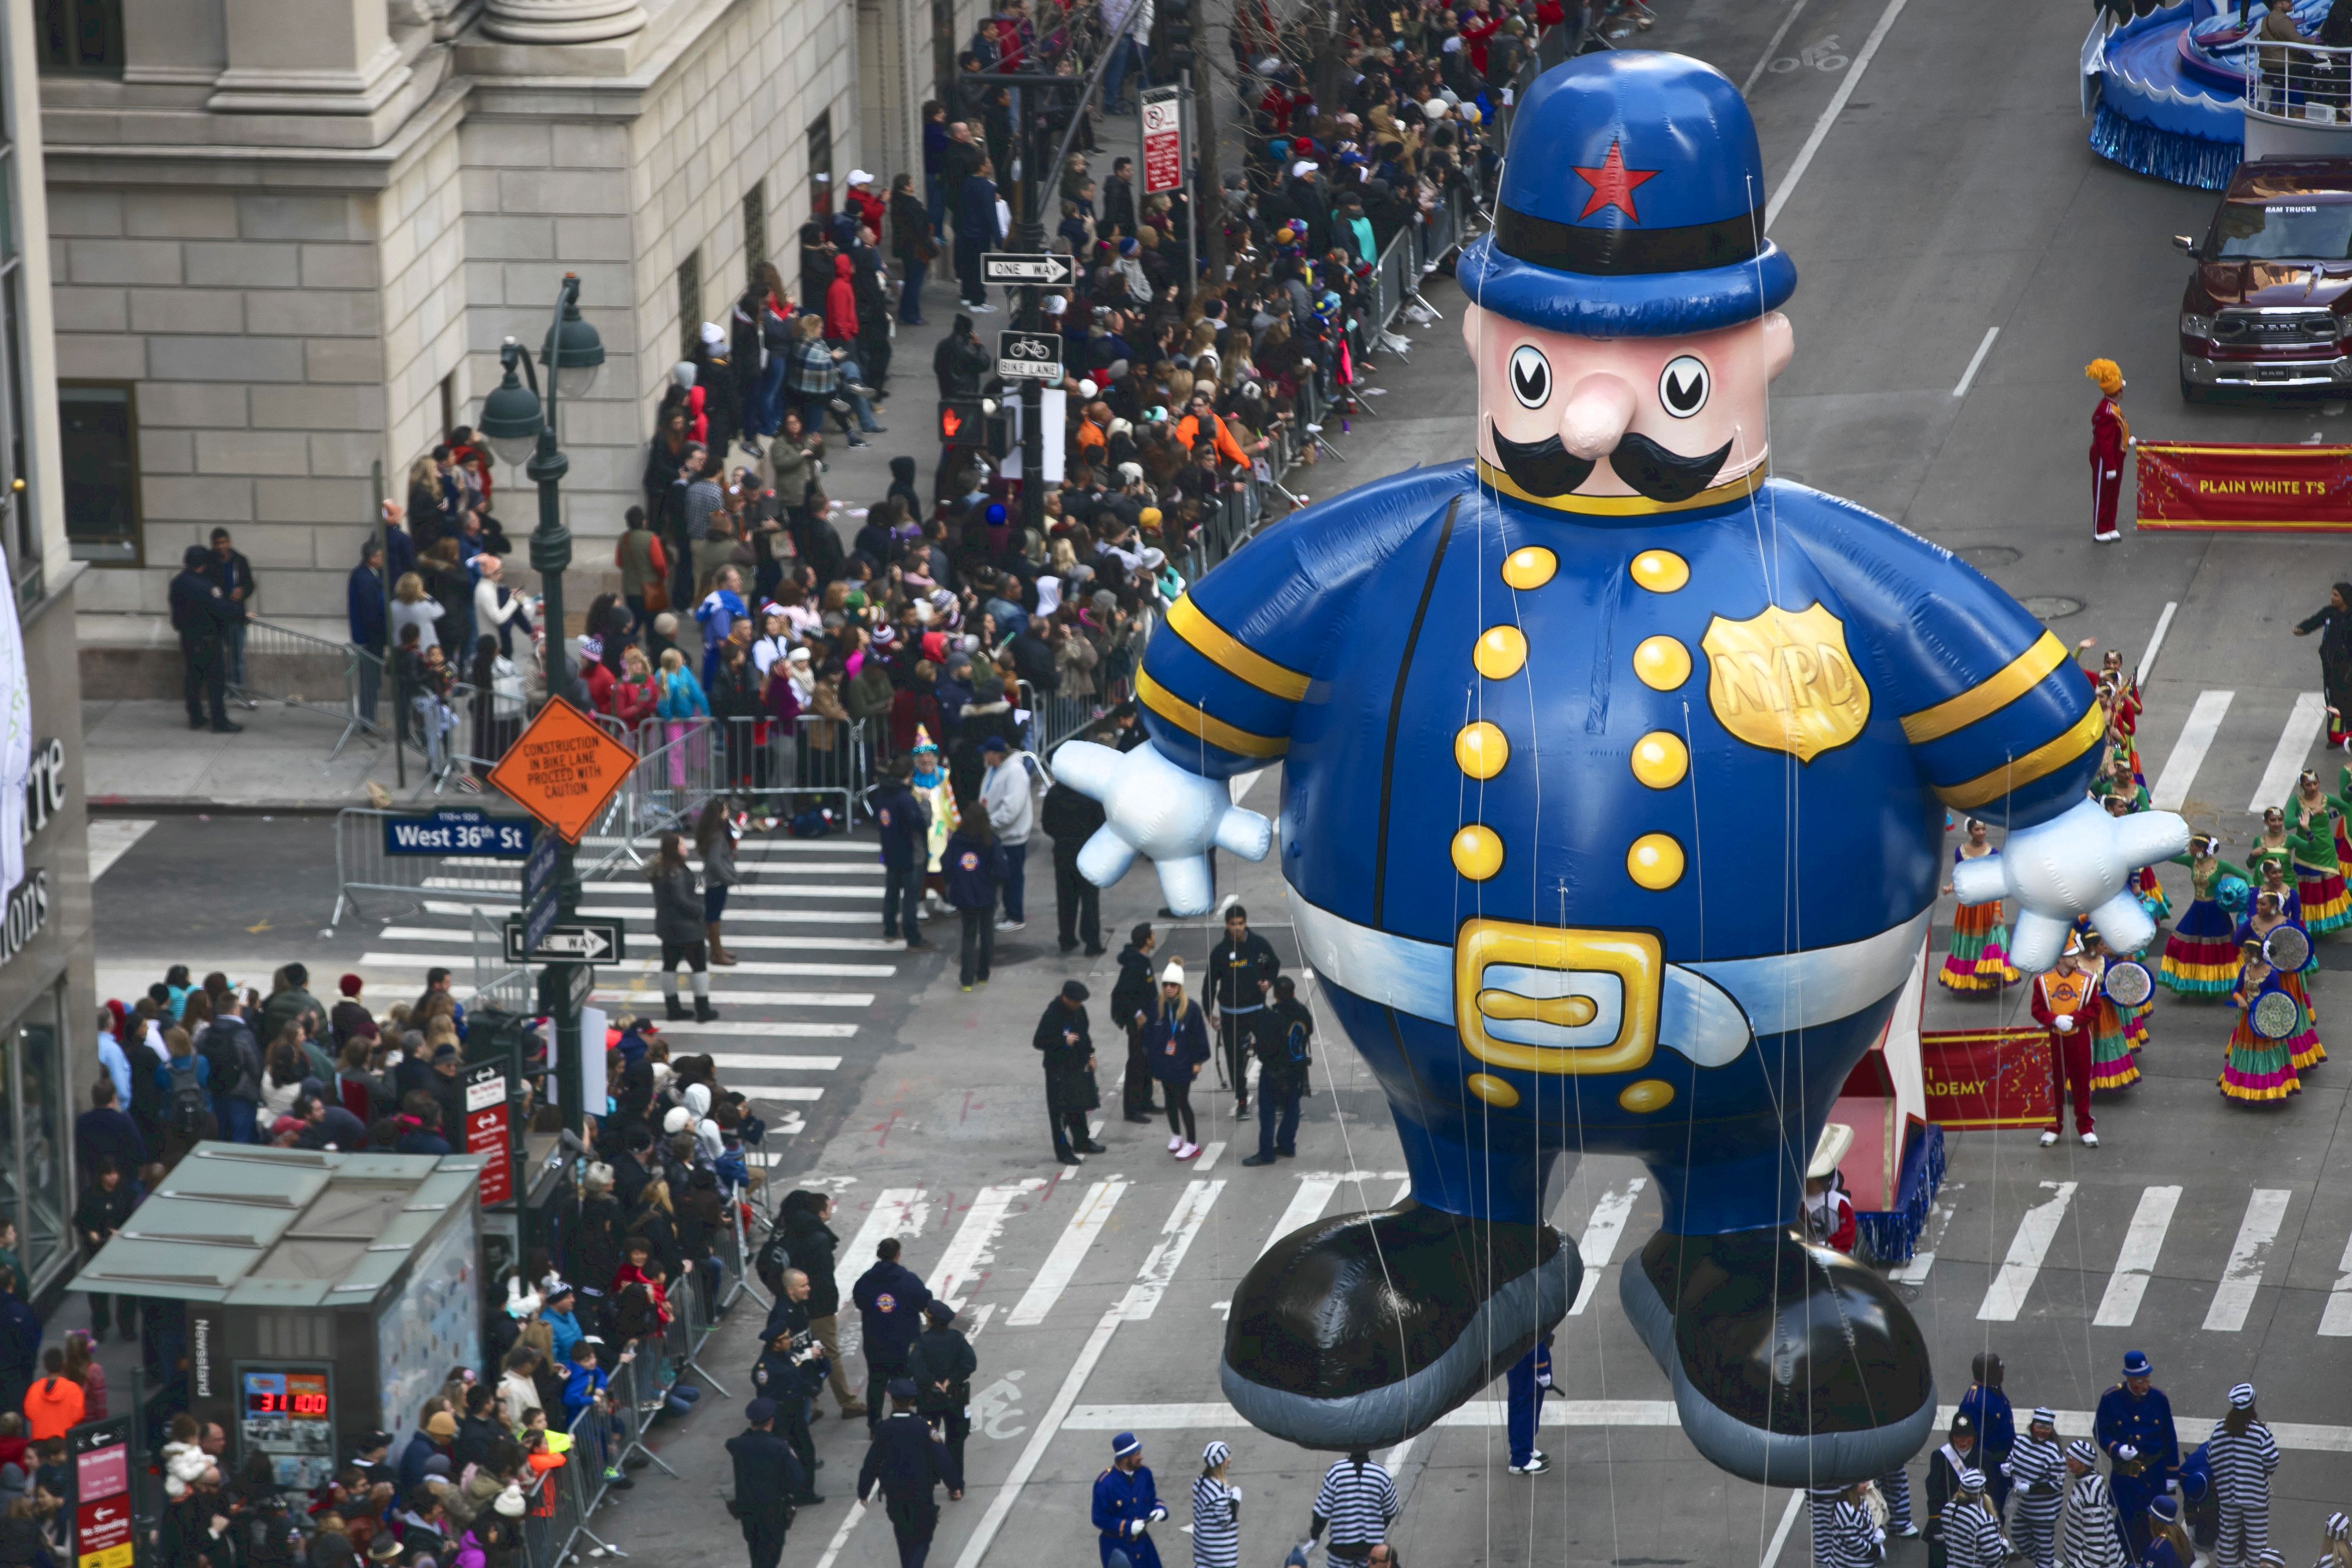 Isis magazine calls macy's thanksgiving day parade 